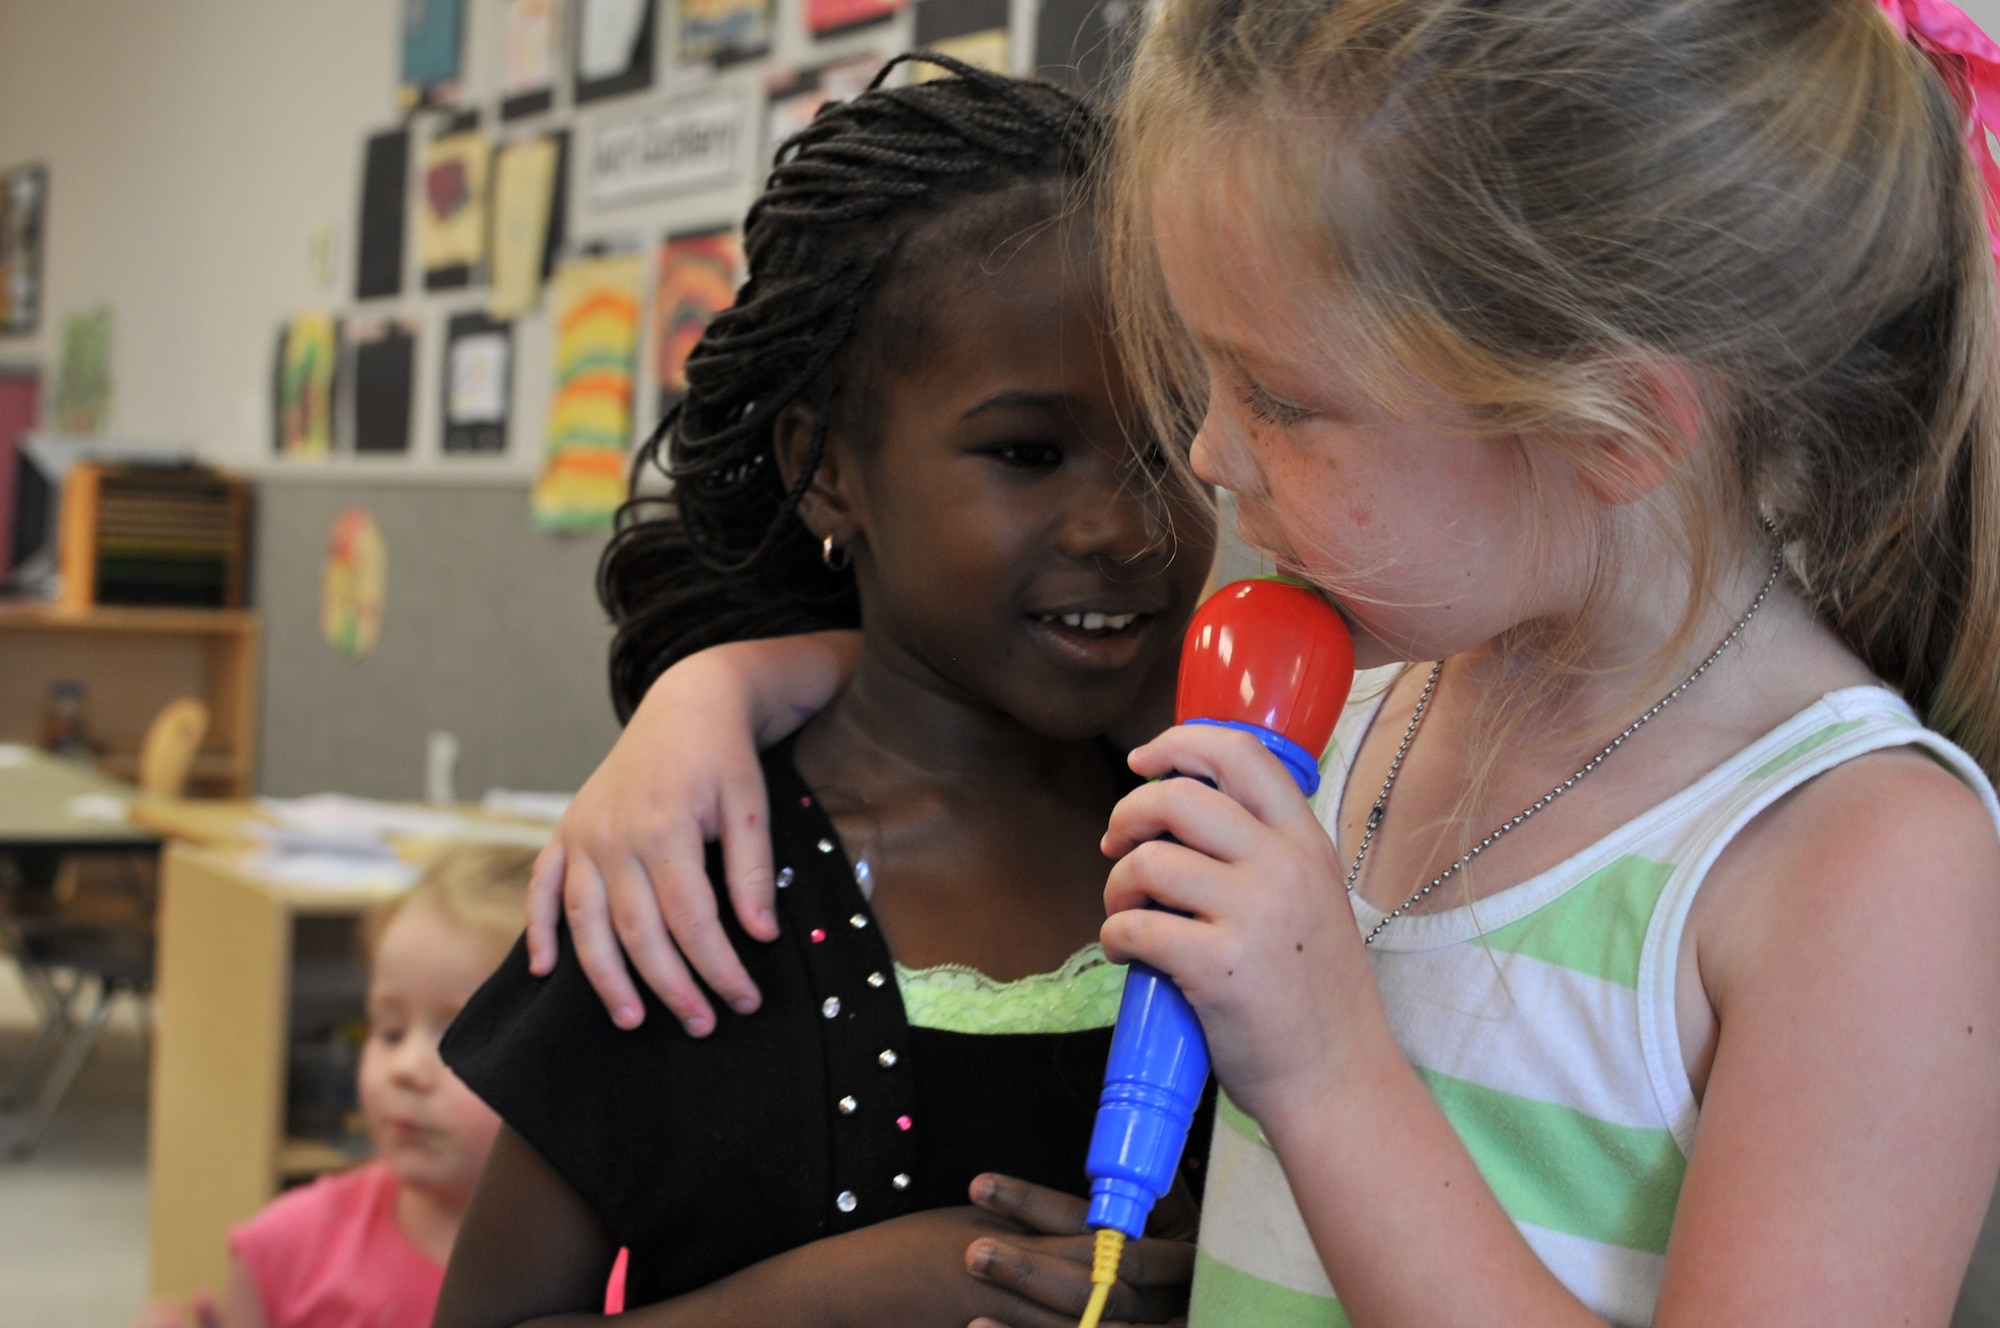 Sarah Caton, a 4-year-old attending the Maxwell Air Force Base child development center, sings to her best friend Fatou Gueye at the CDC, May 20, 2014. Sarah has helped Fatou adjust to American culture since she arrived to the CDC from Senegal in August 2013. (U.S. Air Force photo by Staff Sgt. Natasha Stannard)